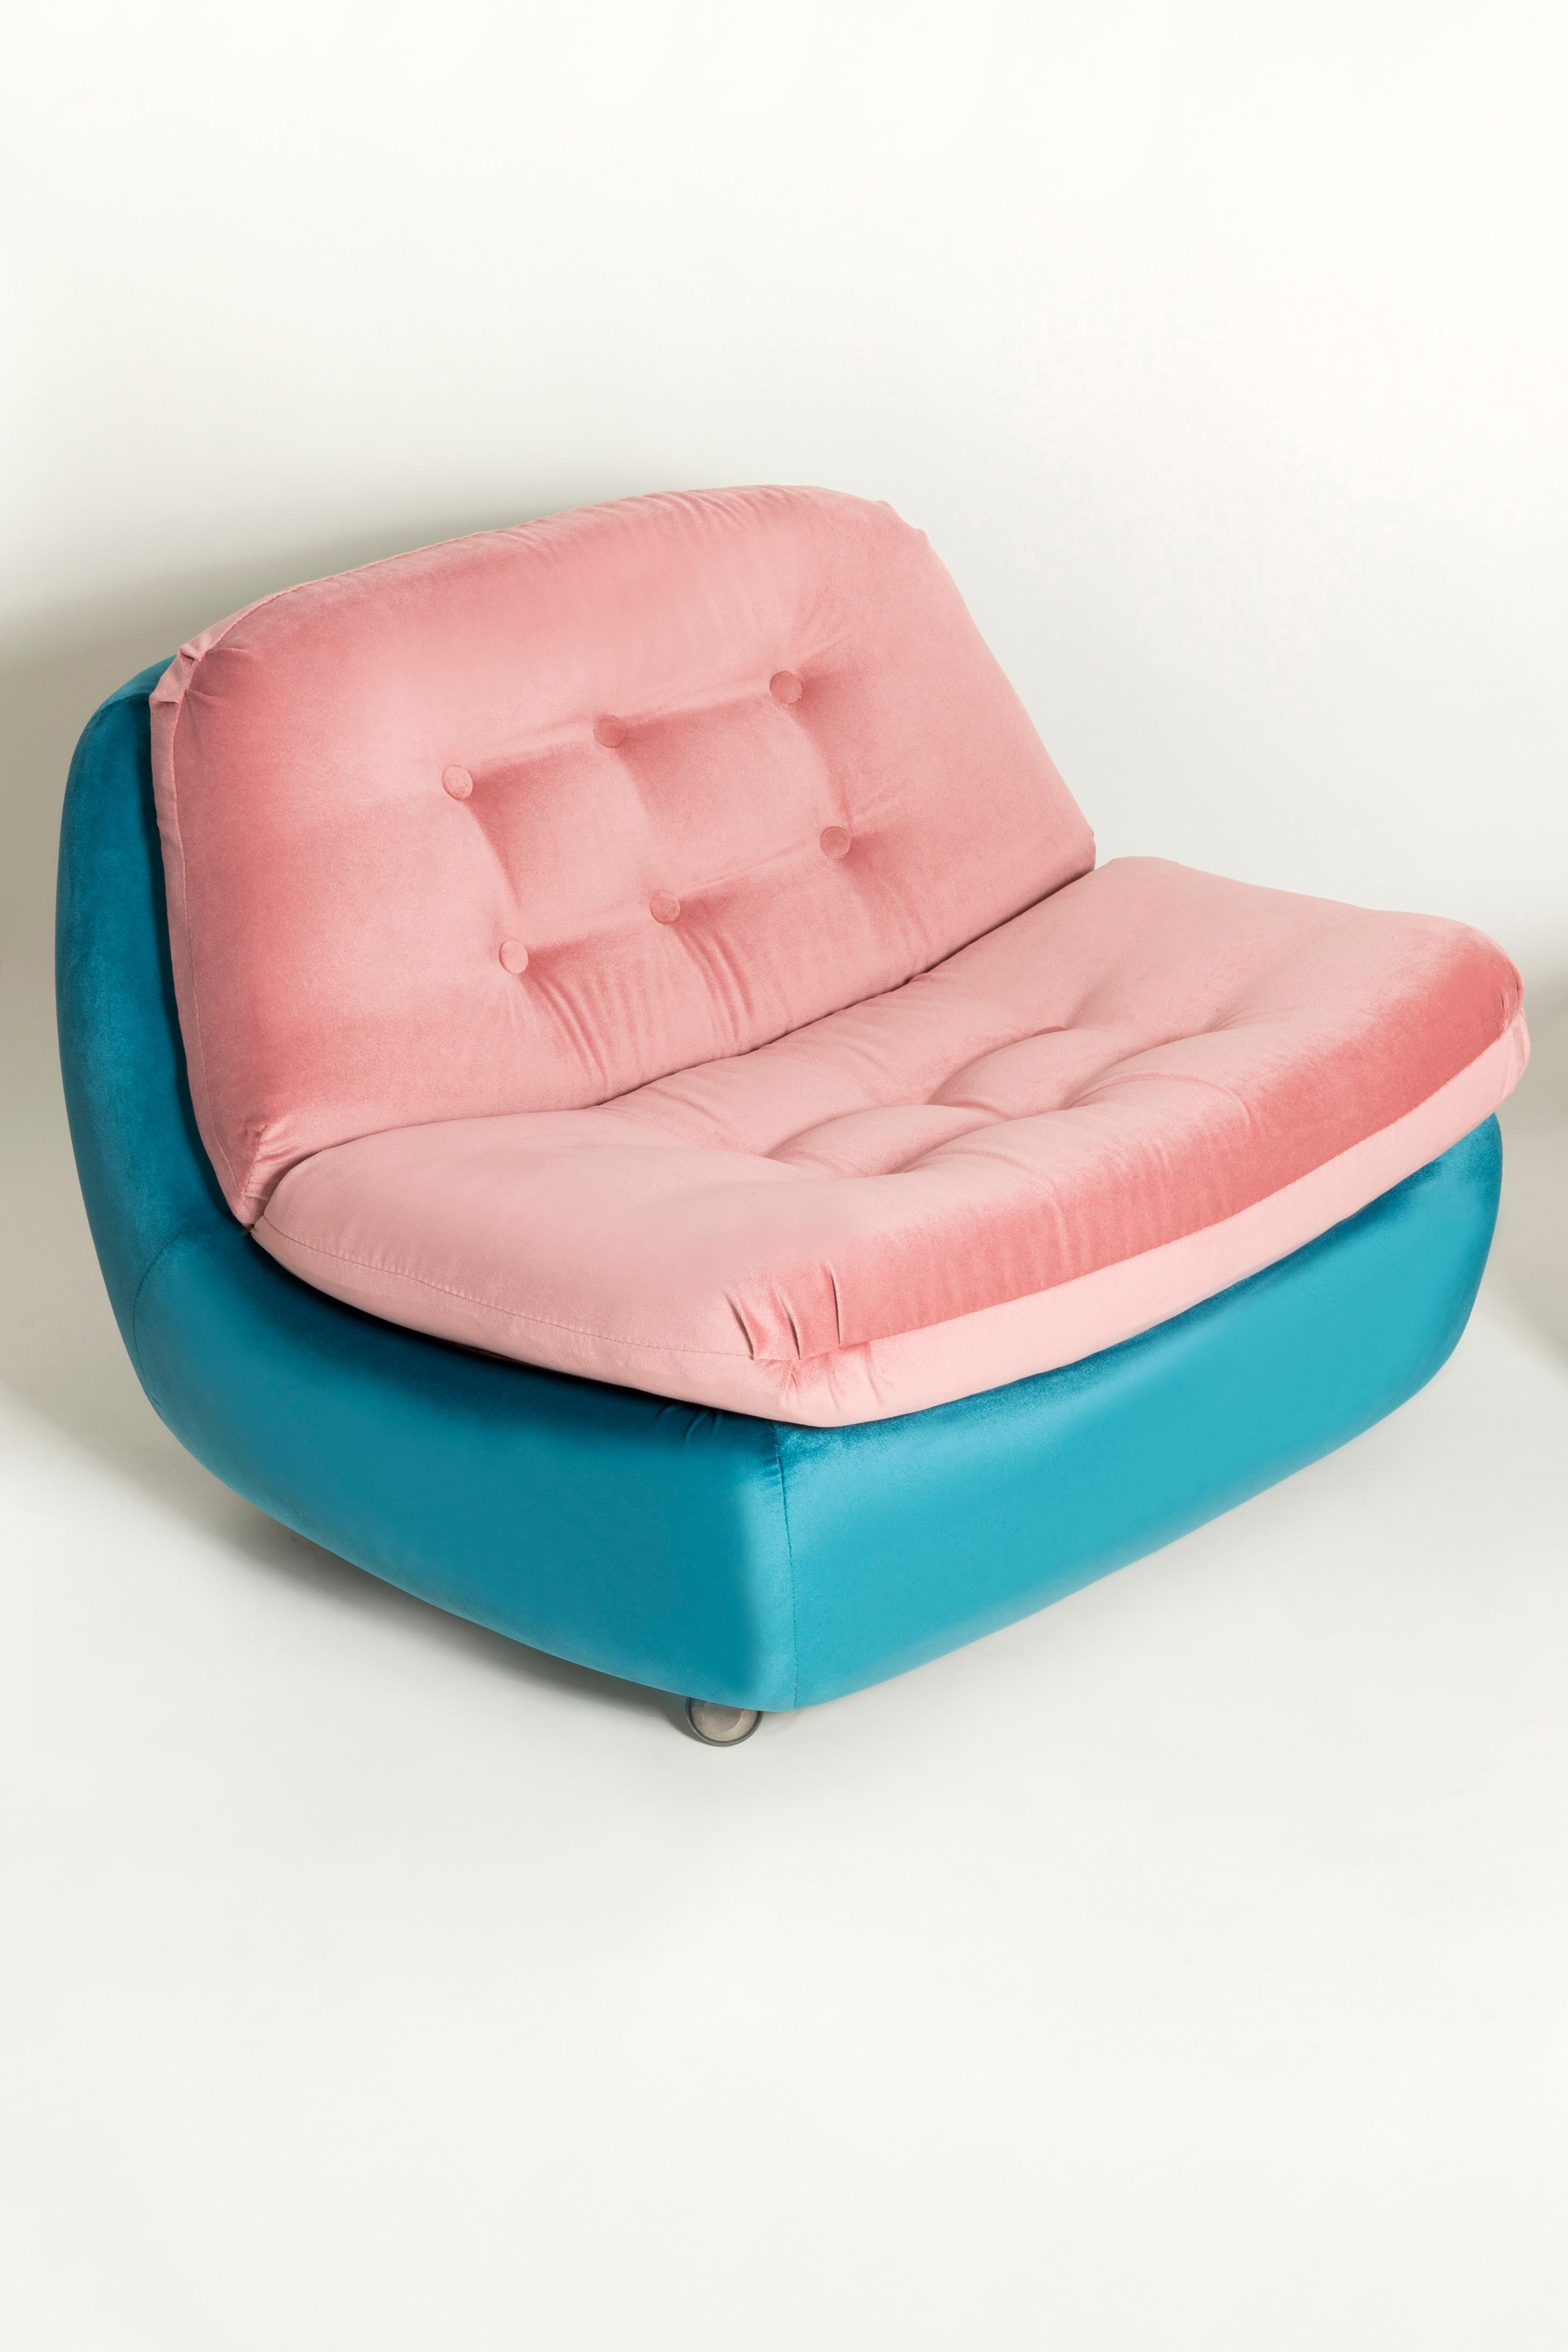 Mid-Century Modern 20th Century Vintage Pink and Blue Atlantis Armchair, 1960s For Sale